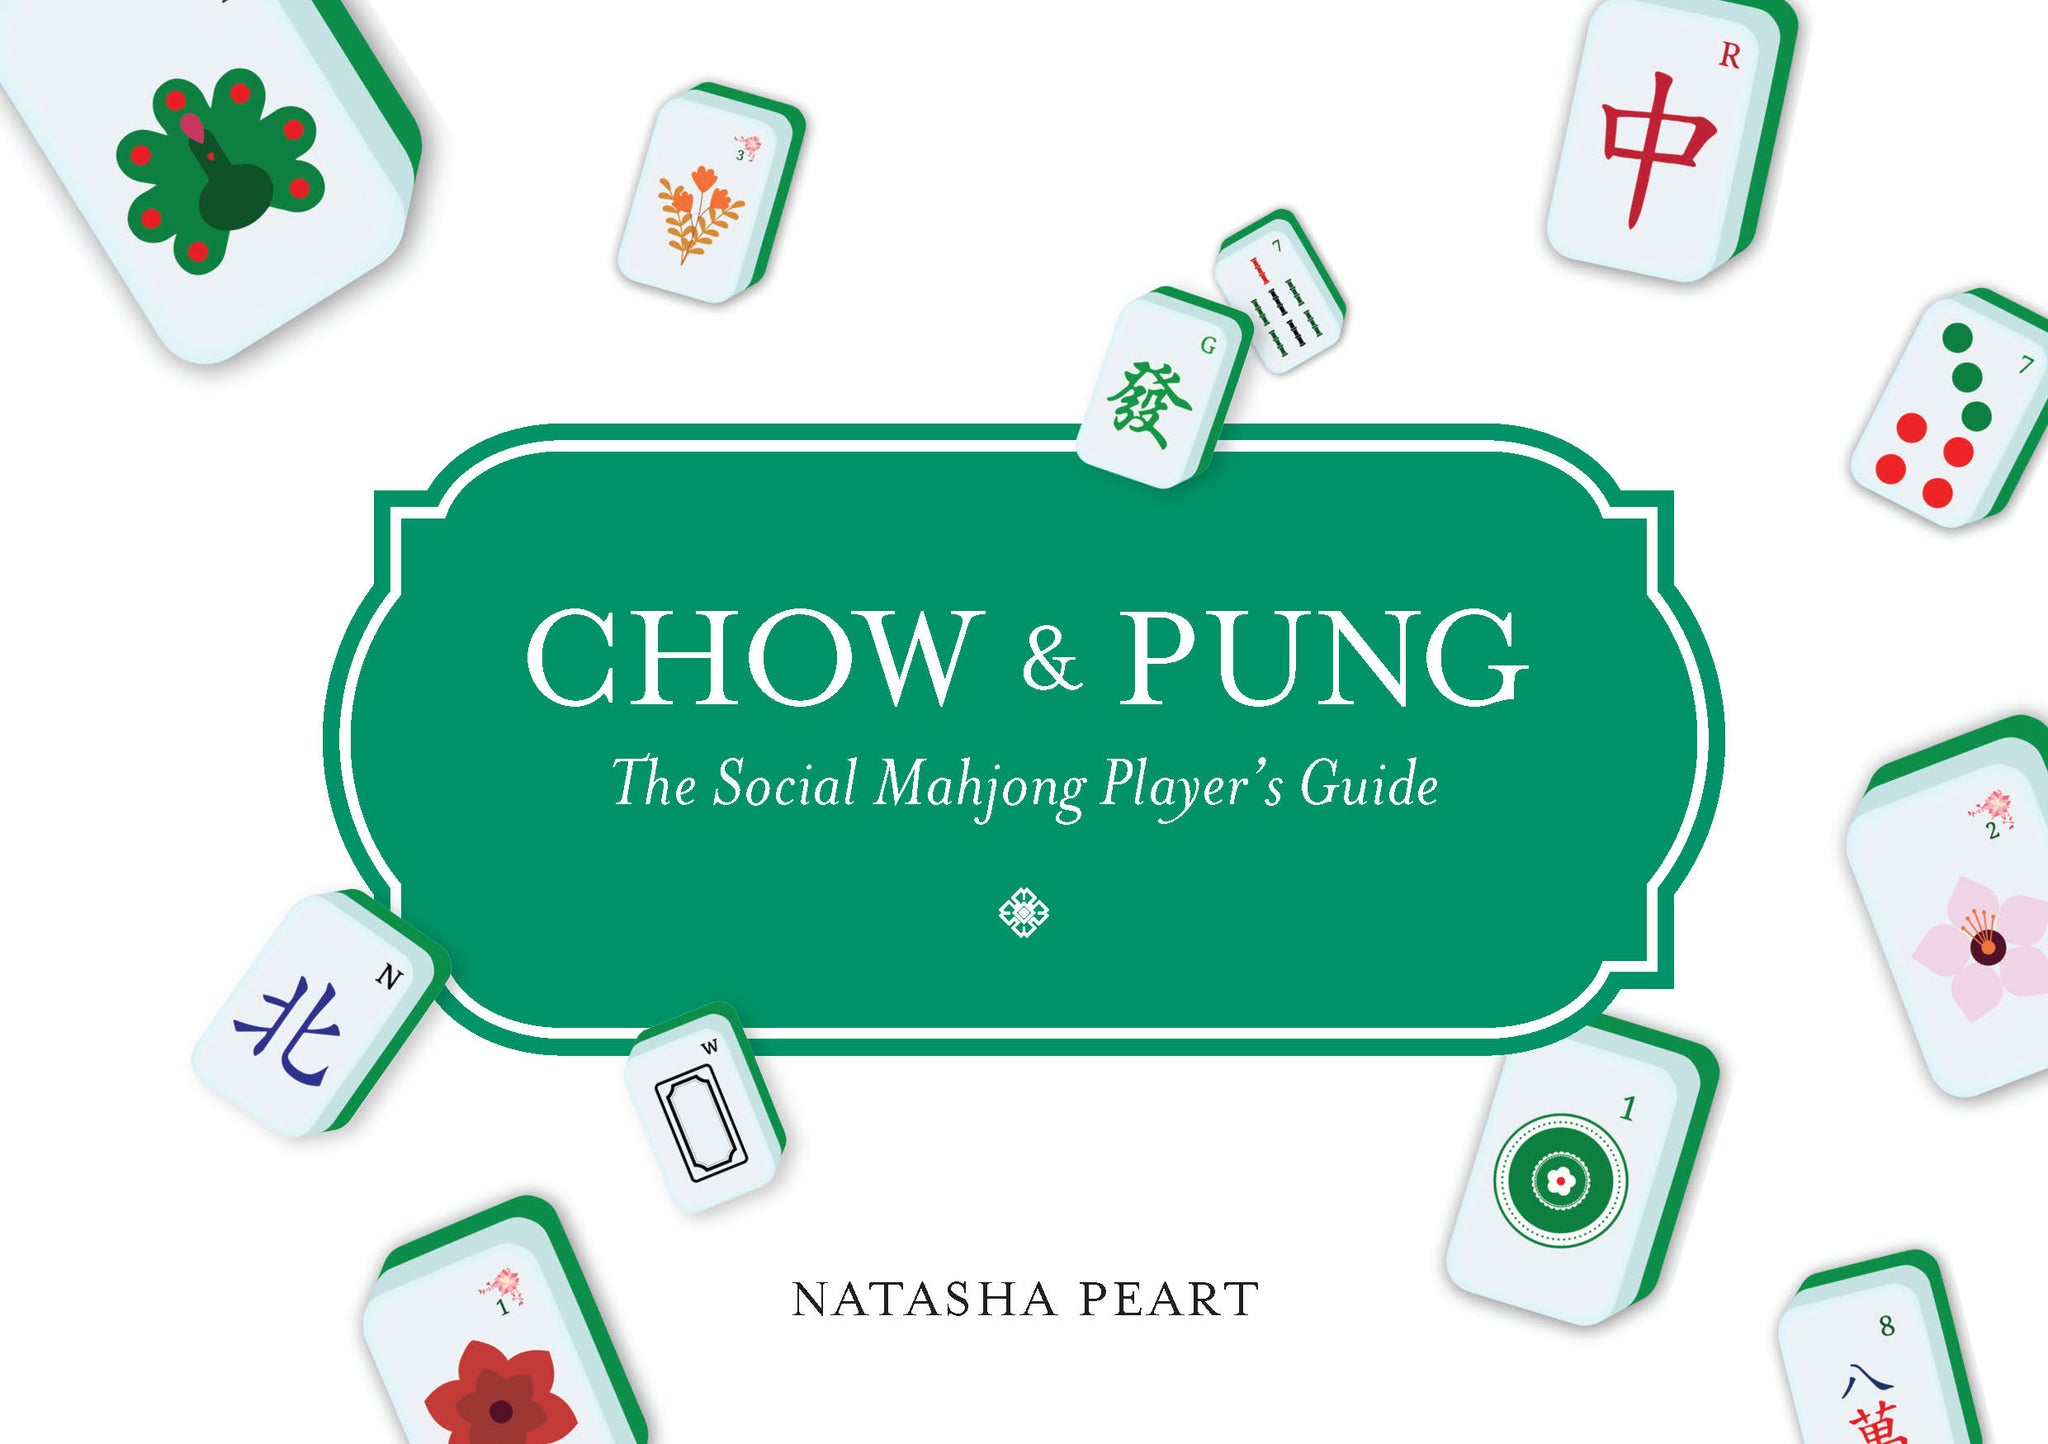 Chow & Pung: The Social Mahjong Player's Guide